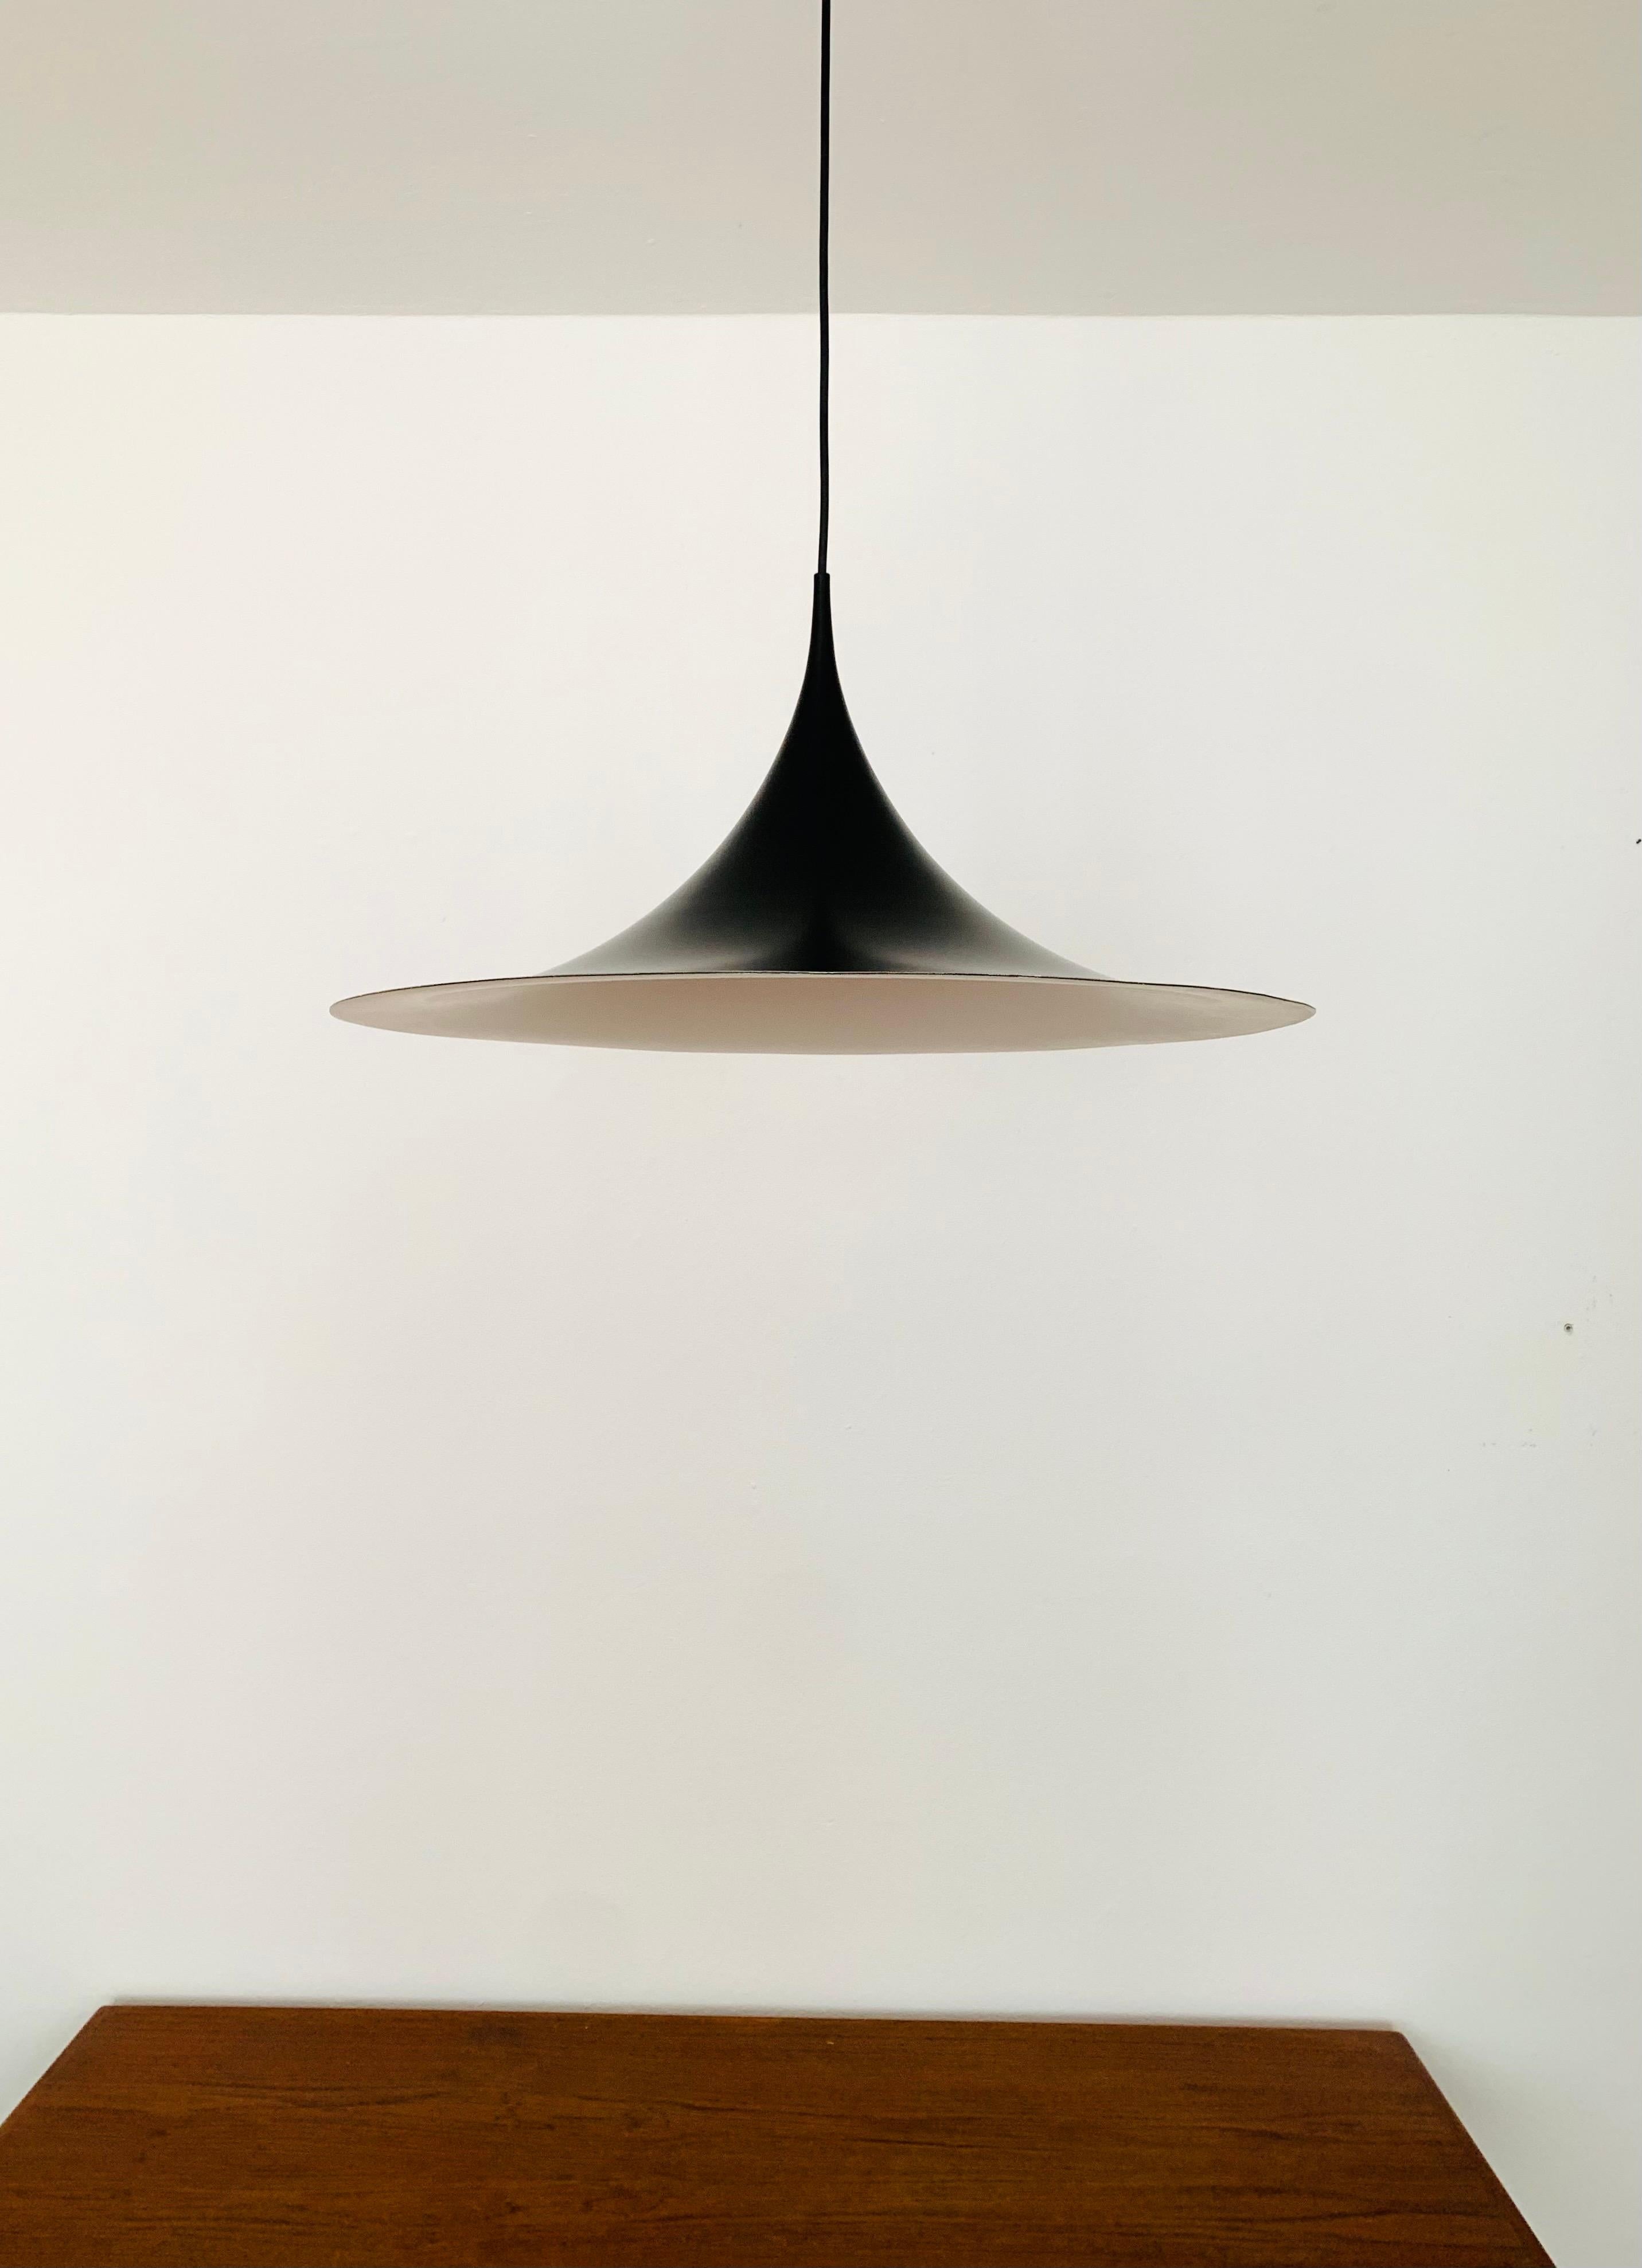 Danish Semi pendant lamp by Bonderup and Thorup for Fog and Morup